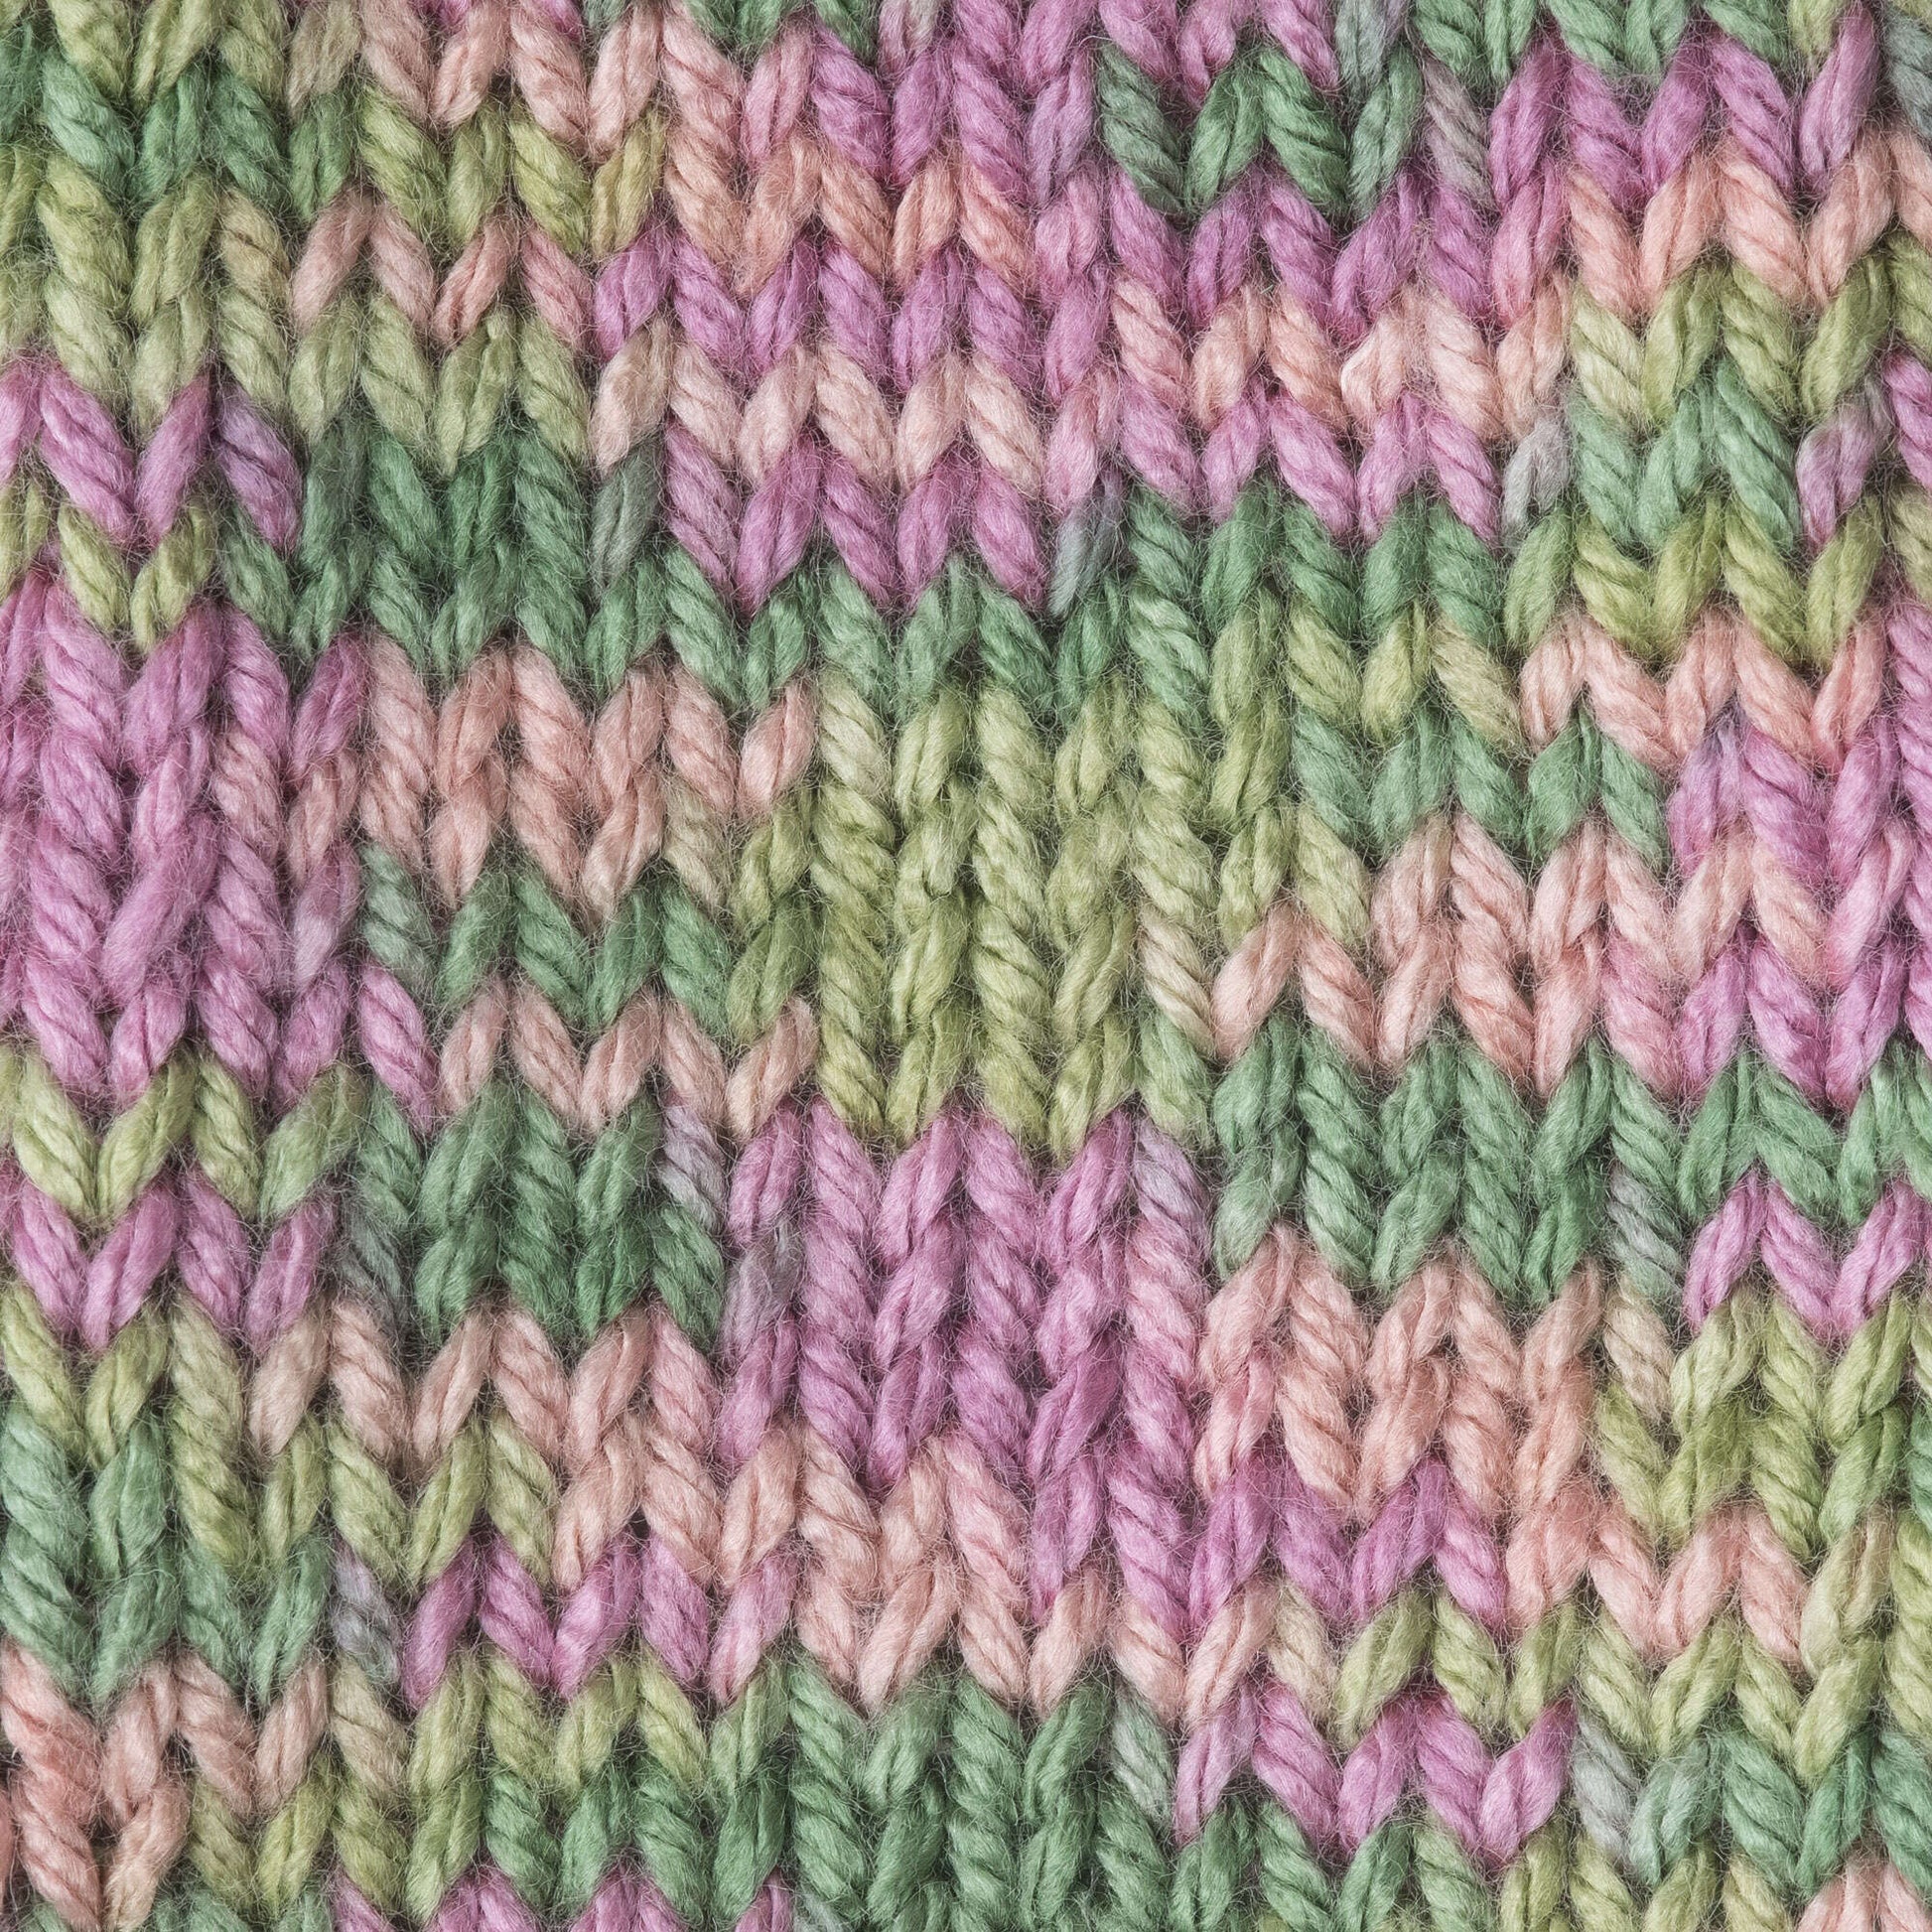 Simply Soft Variegated Yarn – little island crafts